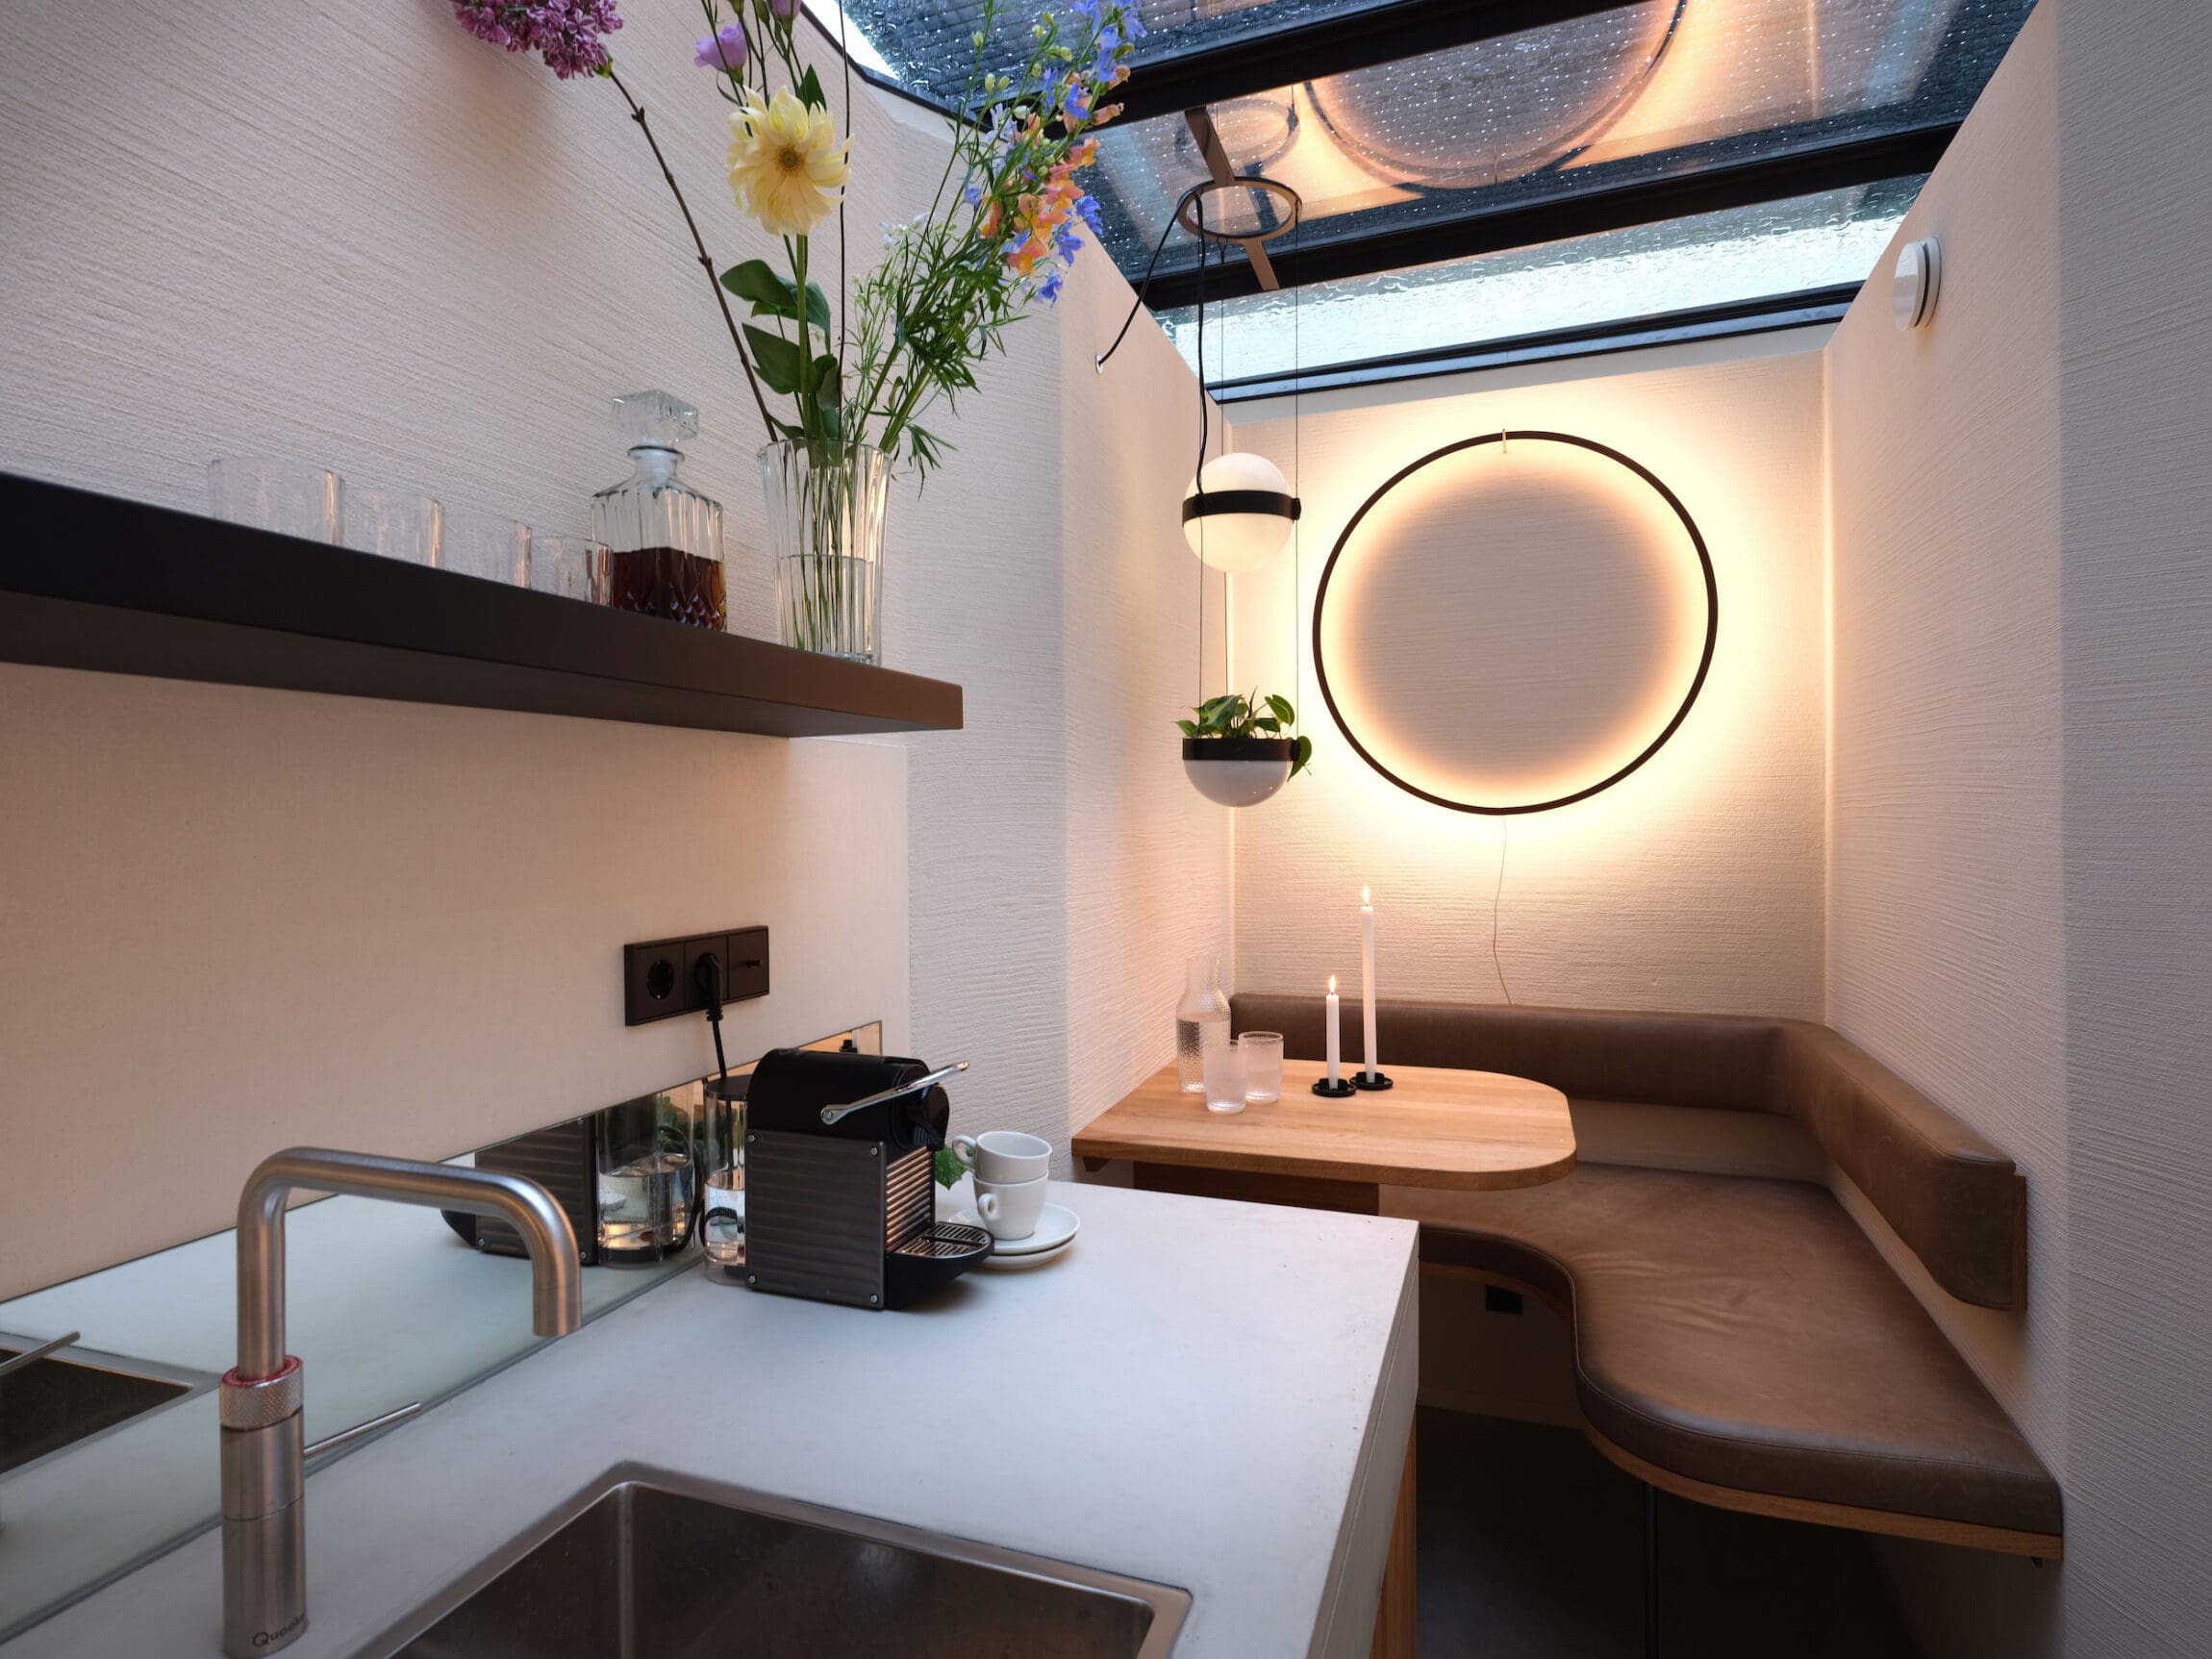 The best hotels in Amsterdam | Sitting area at the Vondice hotel with ring light mirror over a brown corner booth, a sink, and flowers.